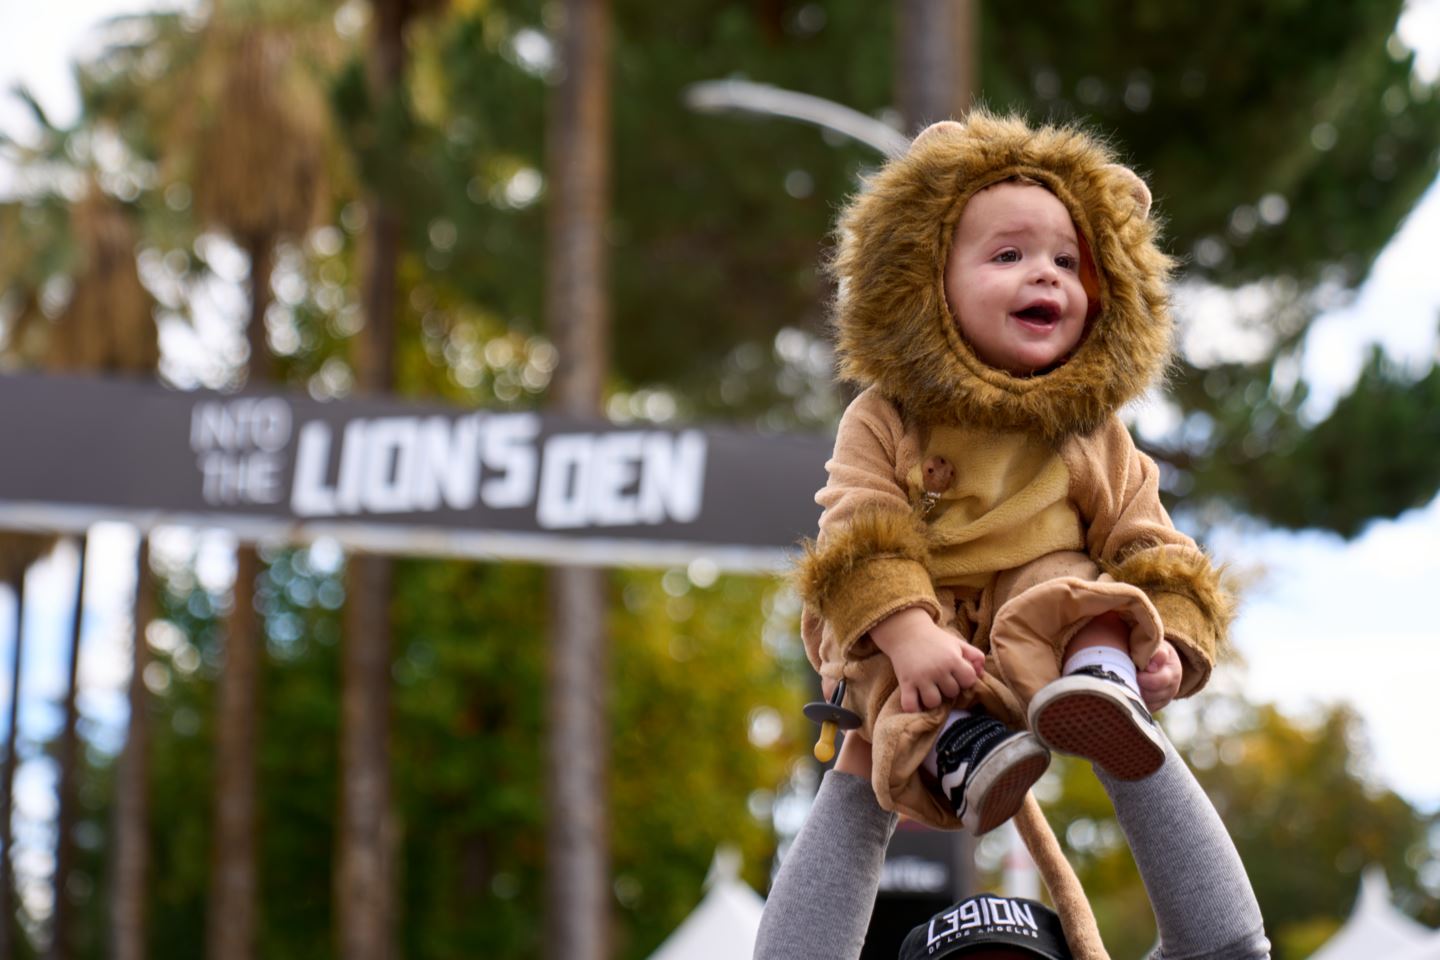 The future winner of Into the Lion's Den.